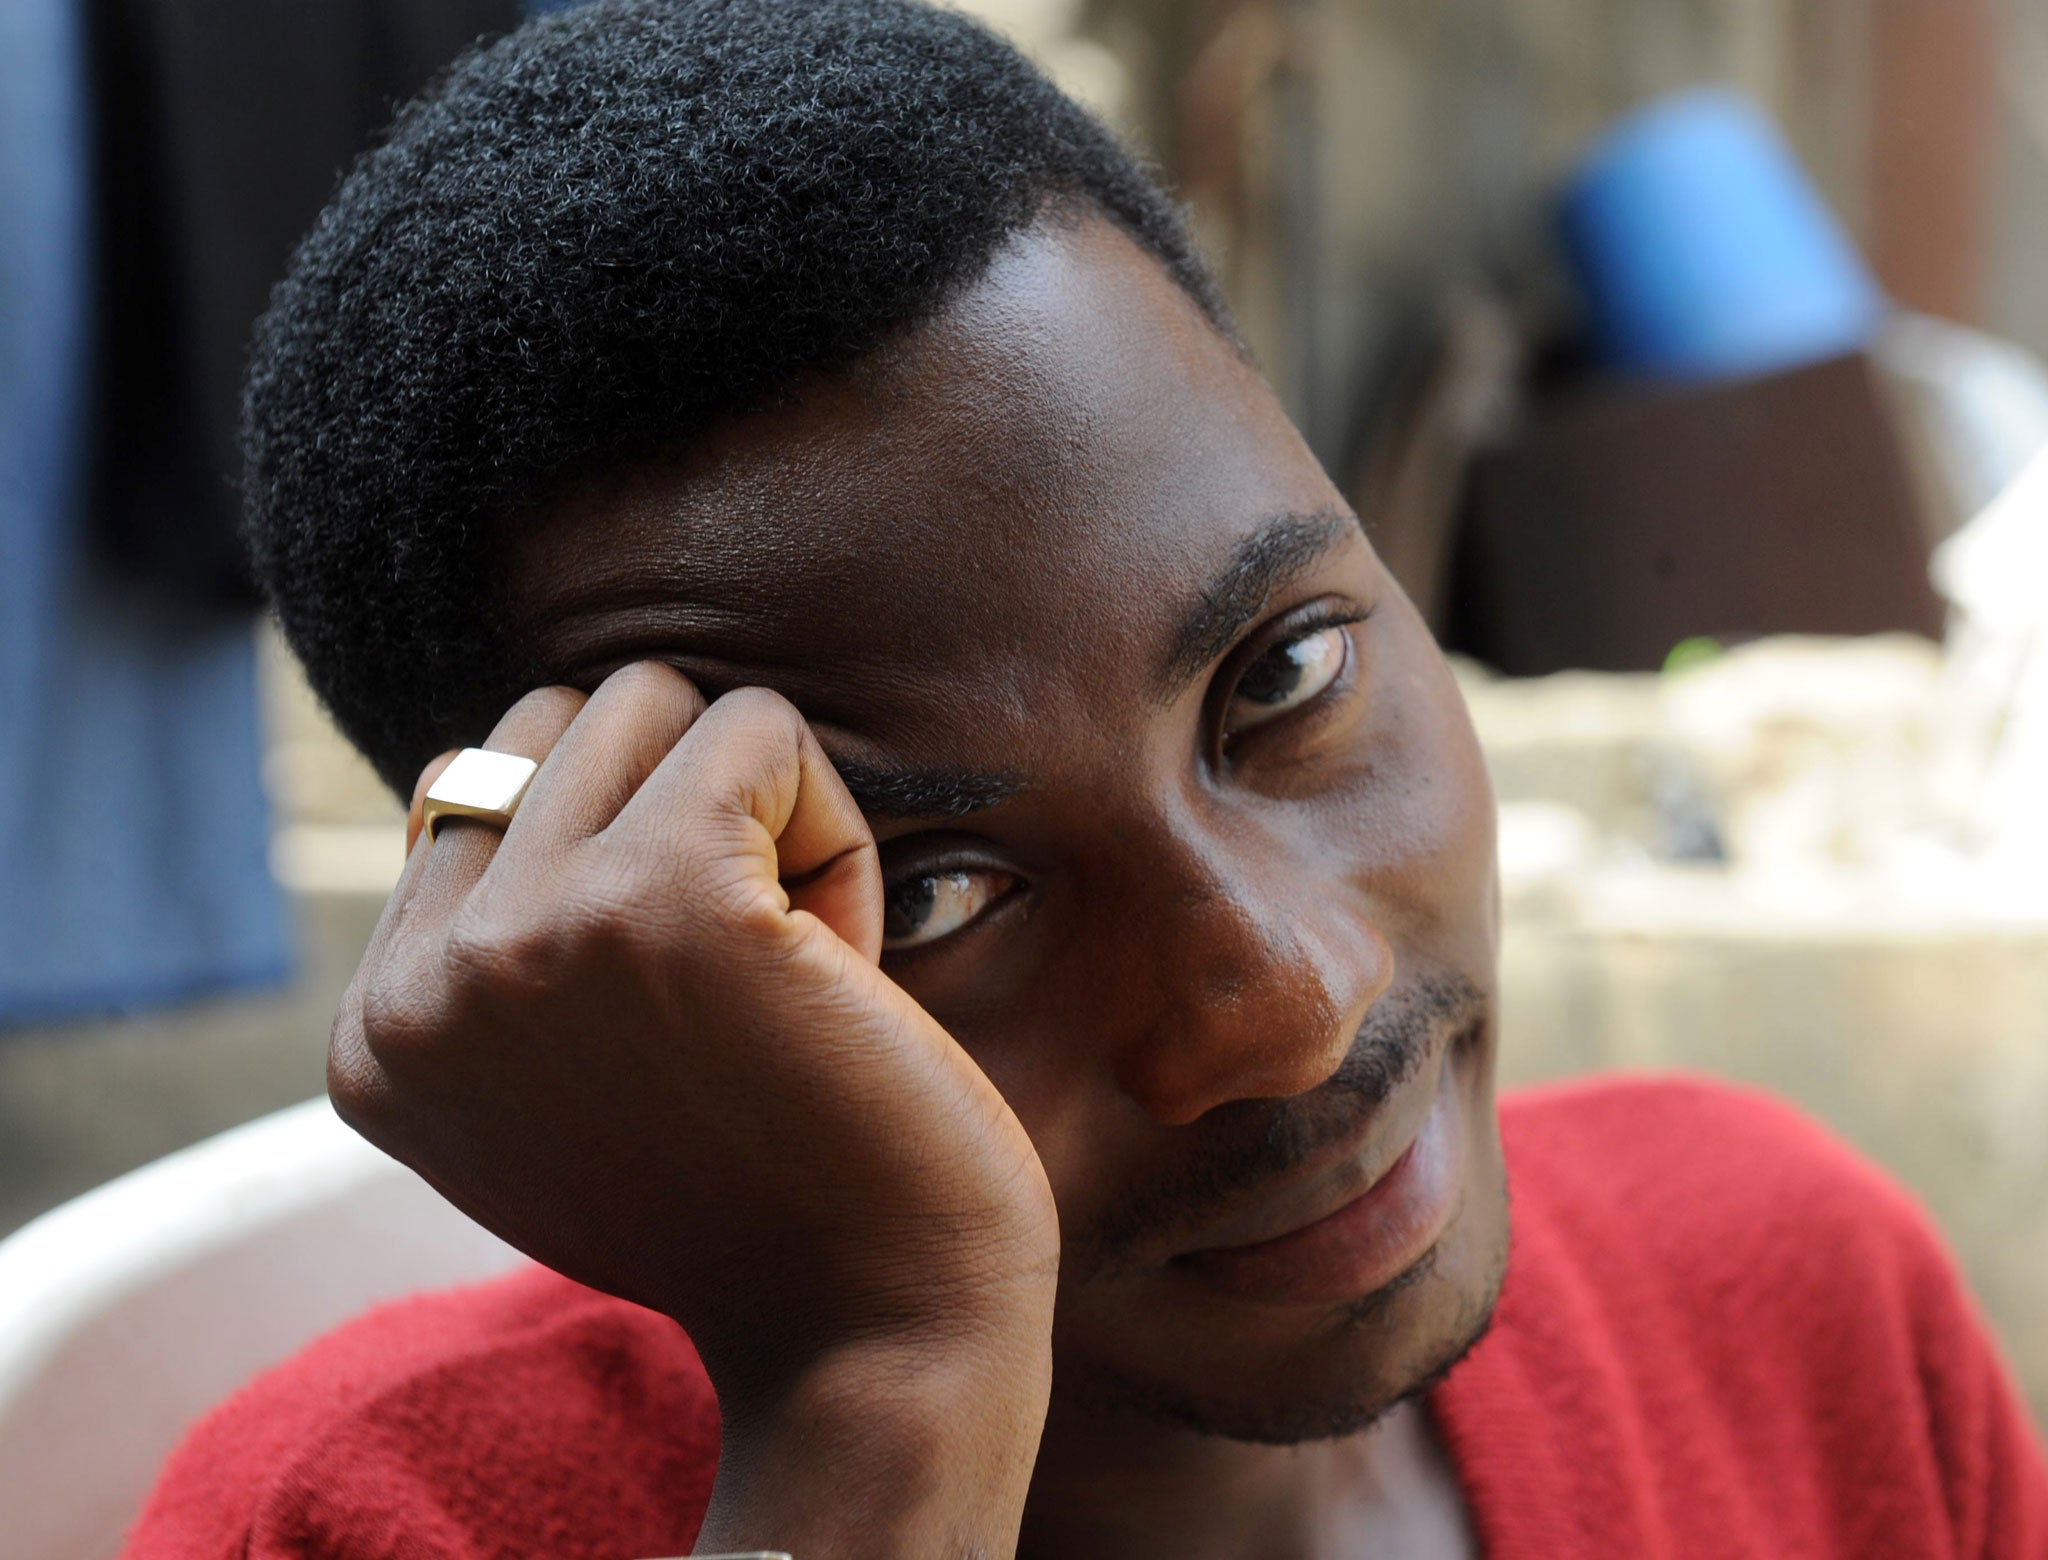 The director of Nigeria's Queer Alliance rights group, Rashidi Williams. Williams condemned a bill passed in May 2013 which criminalized public displays of affection between same-sex couples.